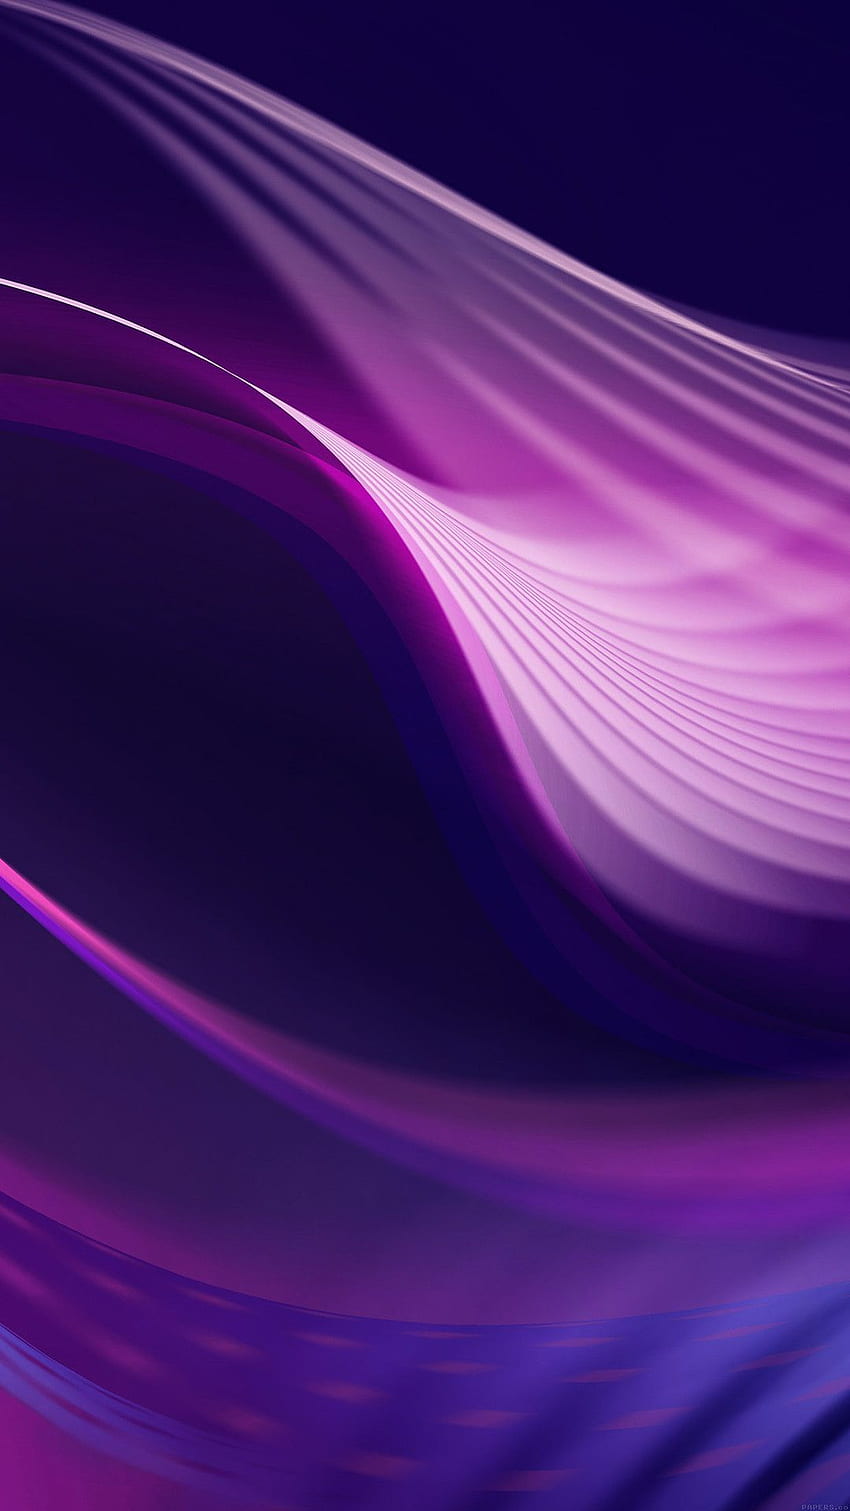 Purple Abstract Images  Free Download on Freepik